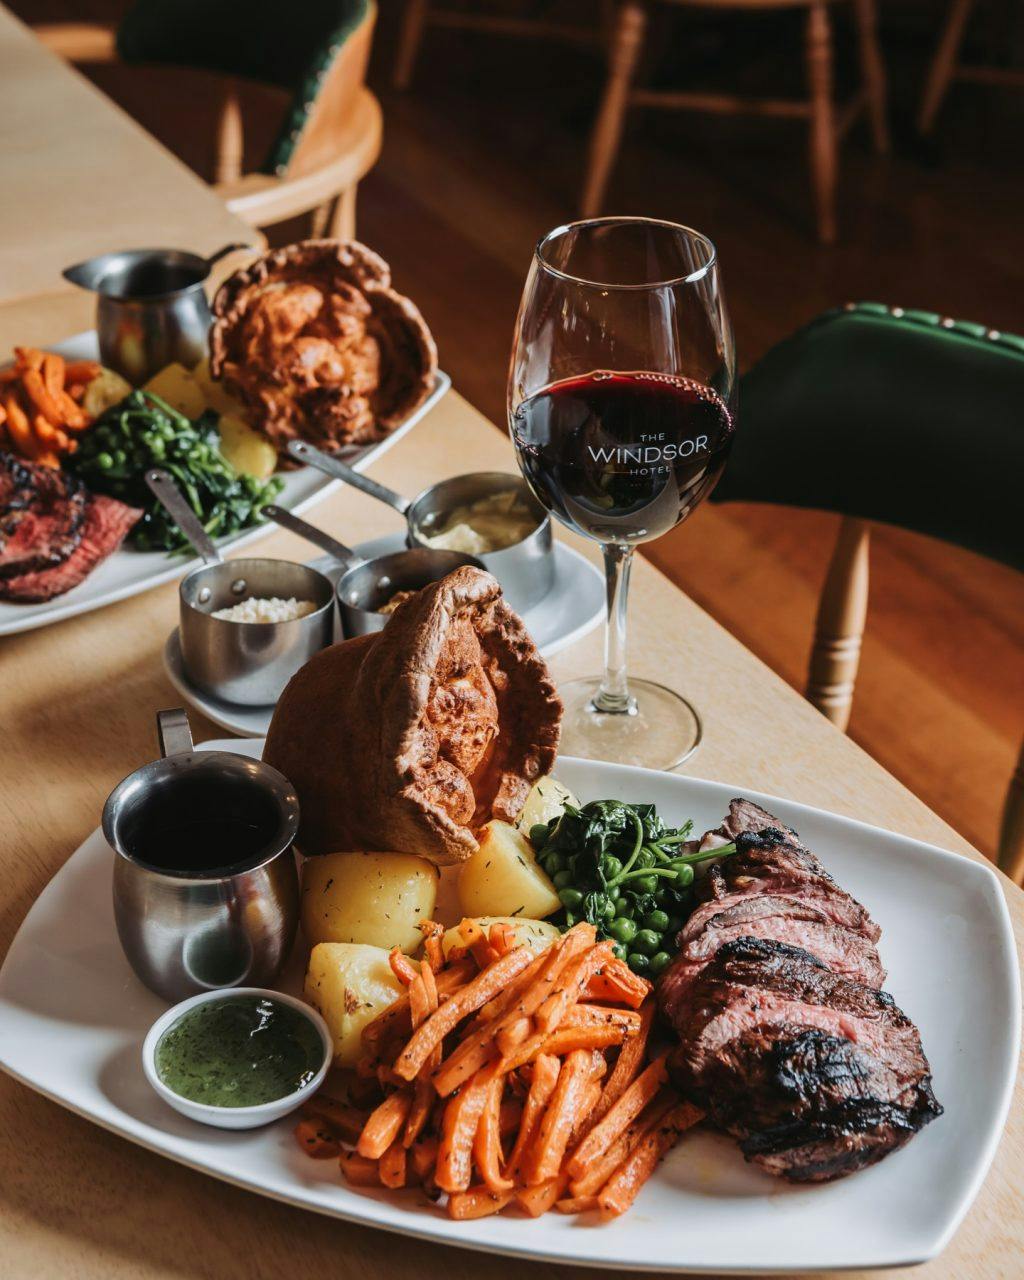 Perth's best Sunday roasts, Windsor Hotel, South Perth